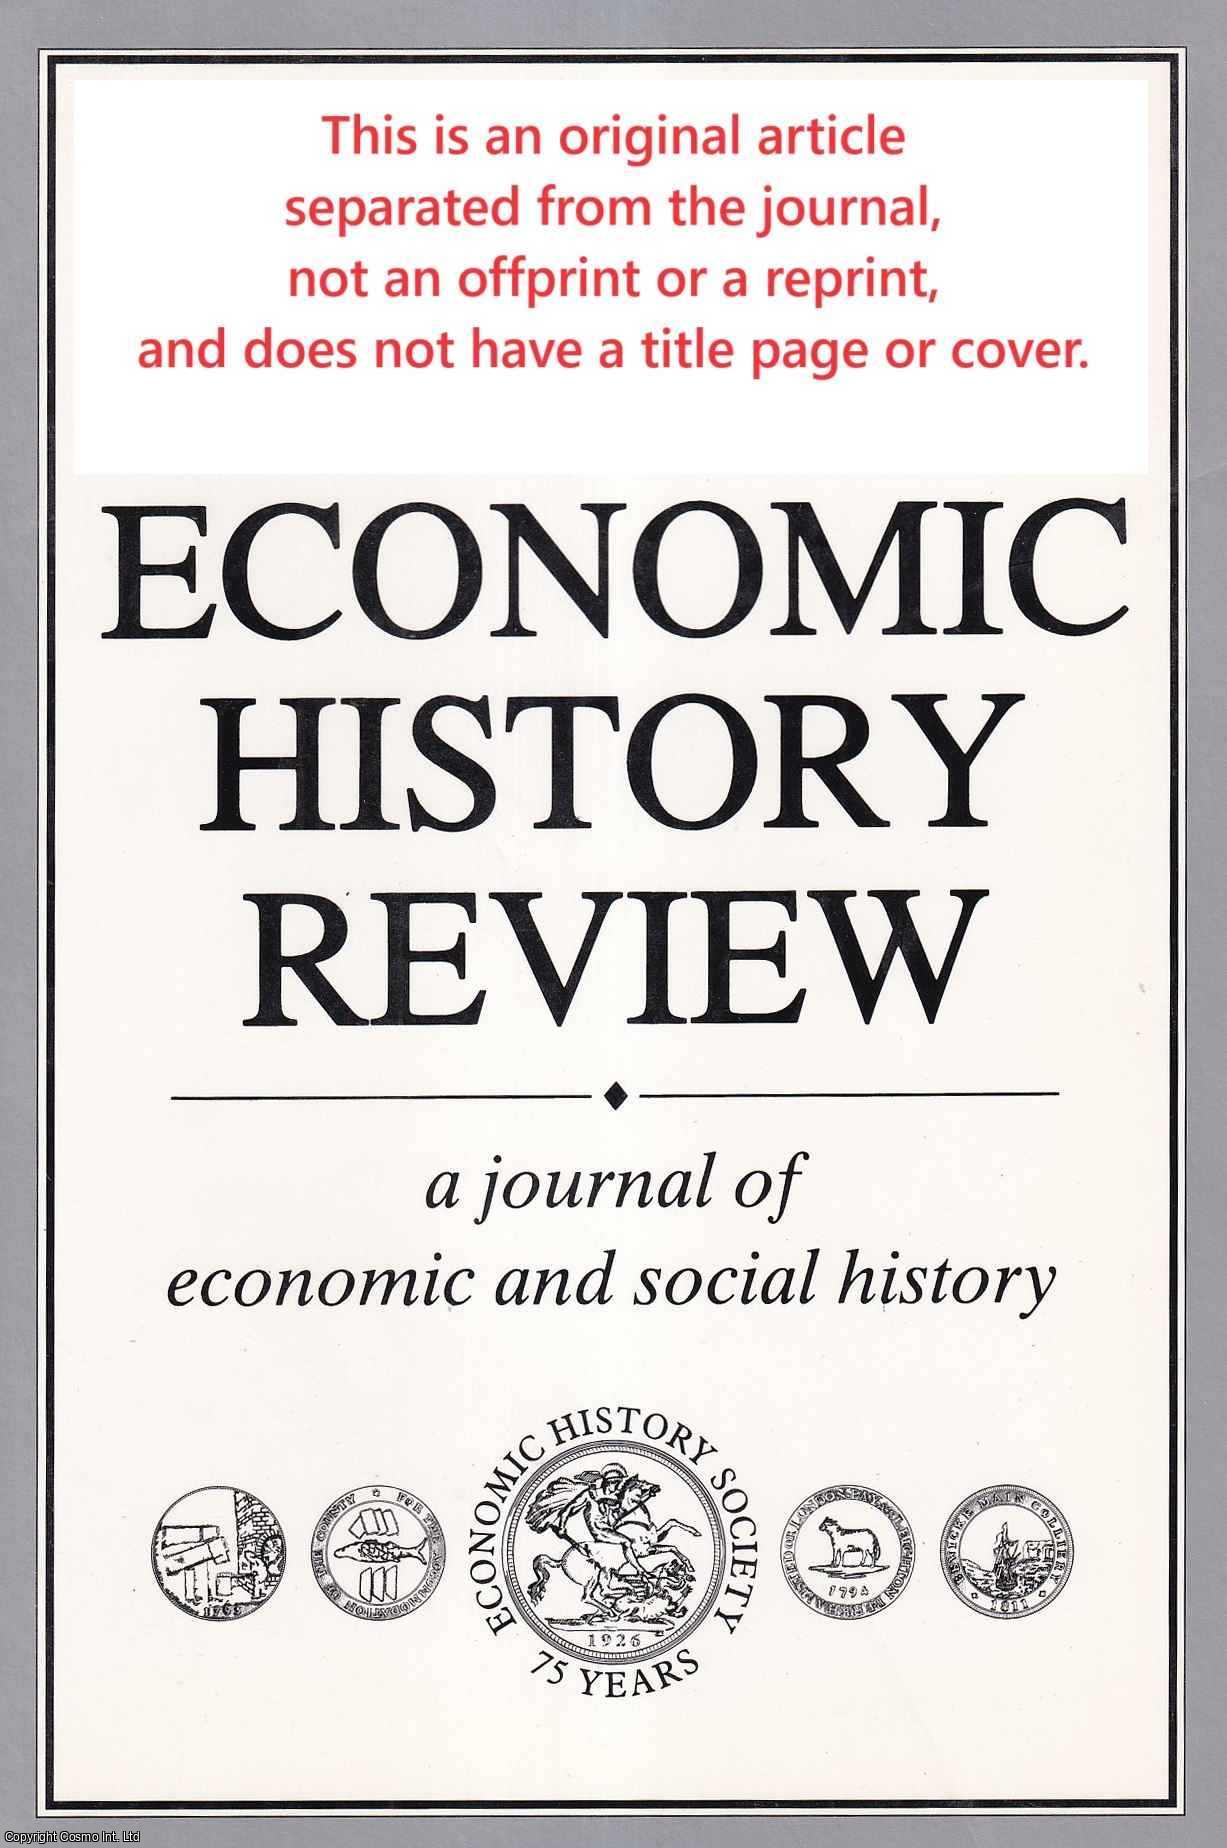 Frank Geary and Tom Stark - Trends in Real Wages During The Industrial Revolution: A View from Across The Irish Sea. An original article from the Economic History Review, 2004.